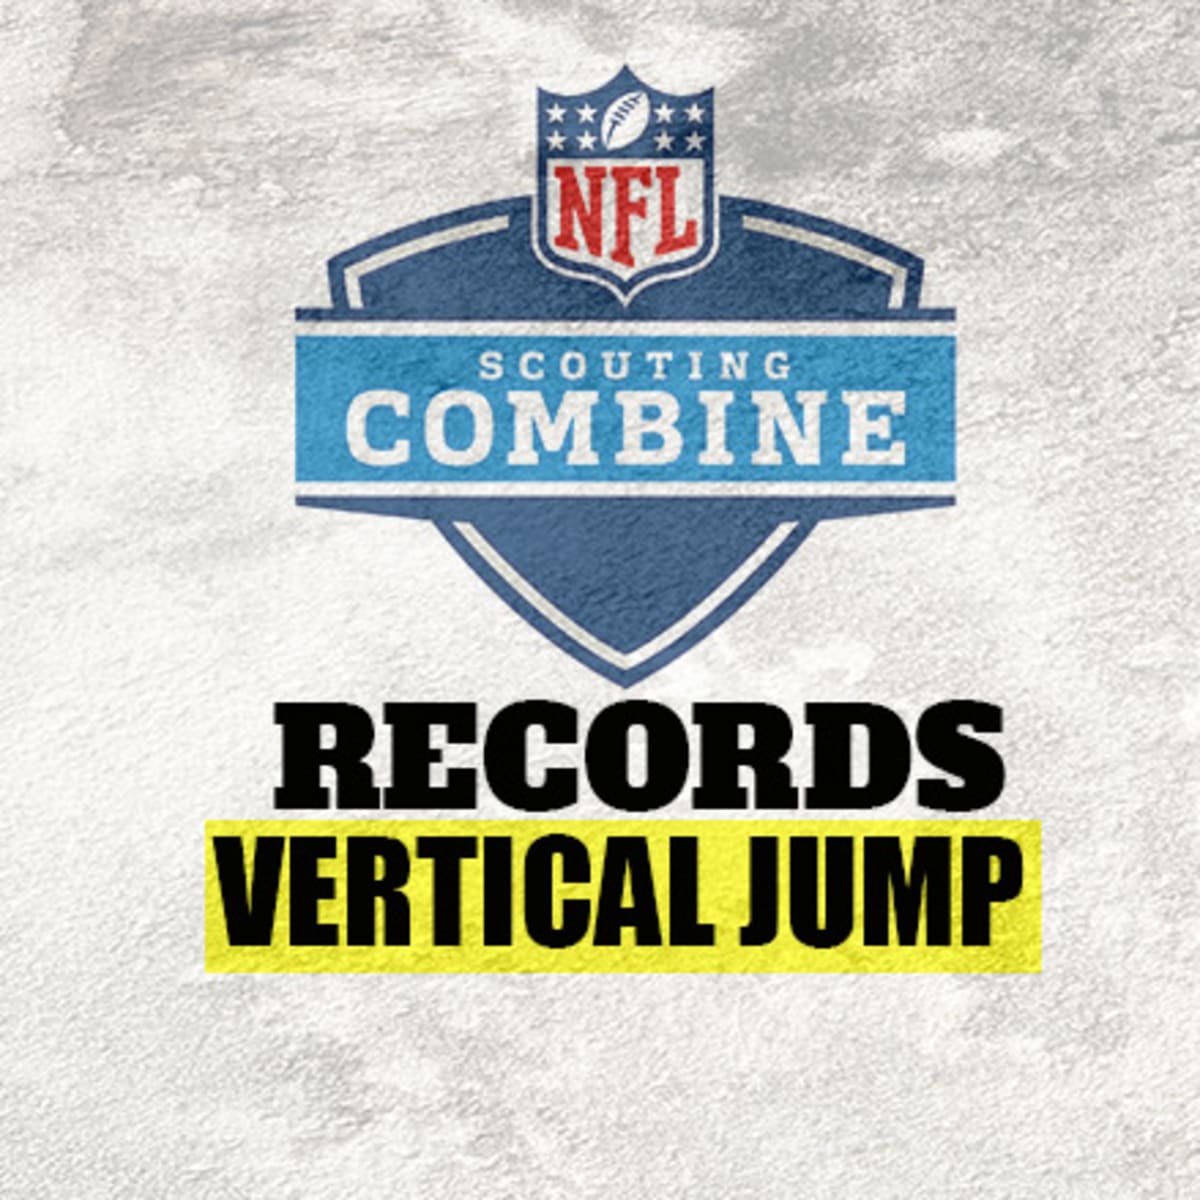 NFL Scouting Combine: Vertical Jump Record 